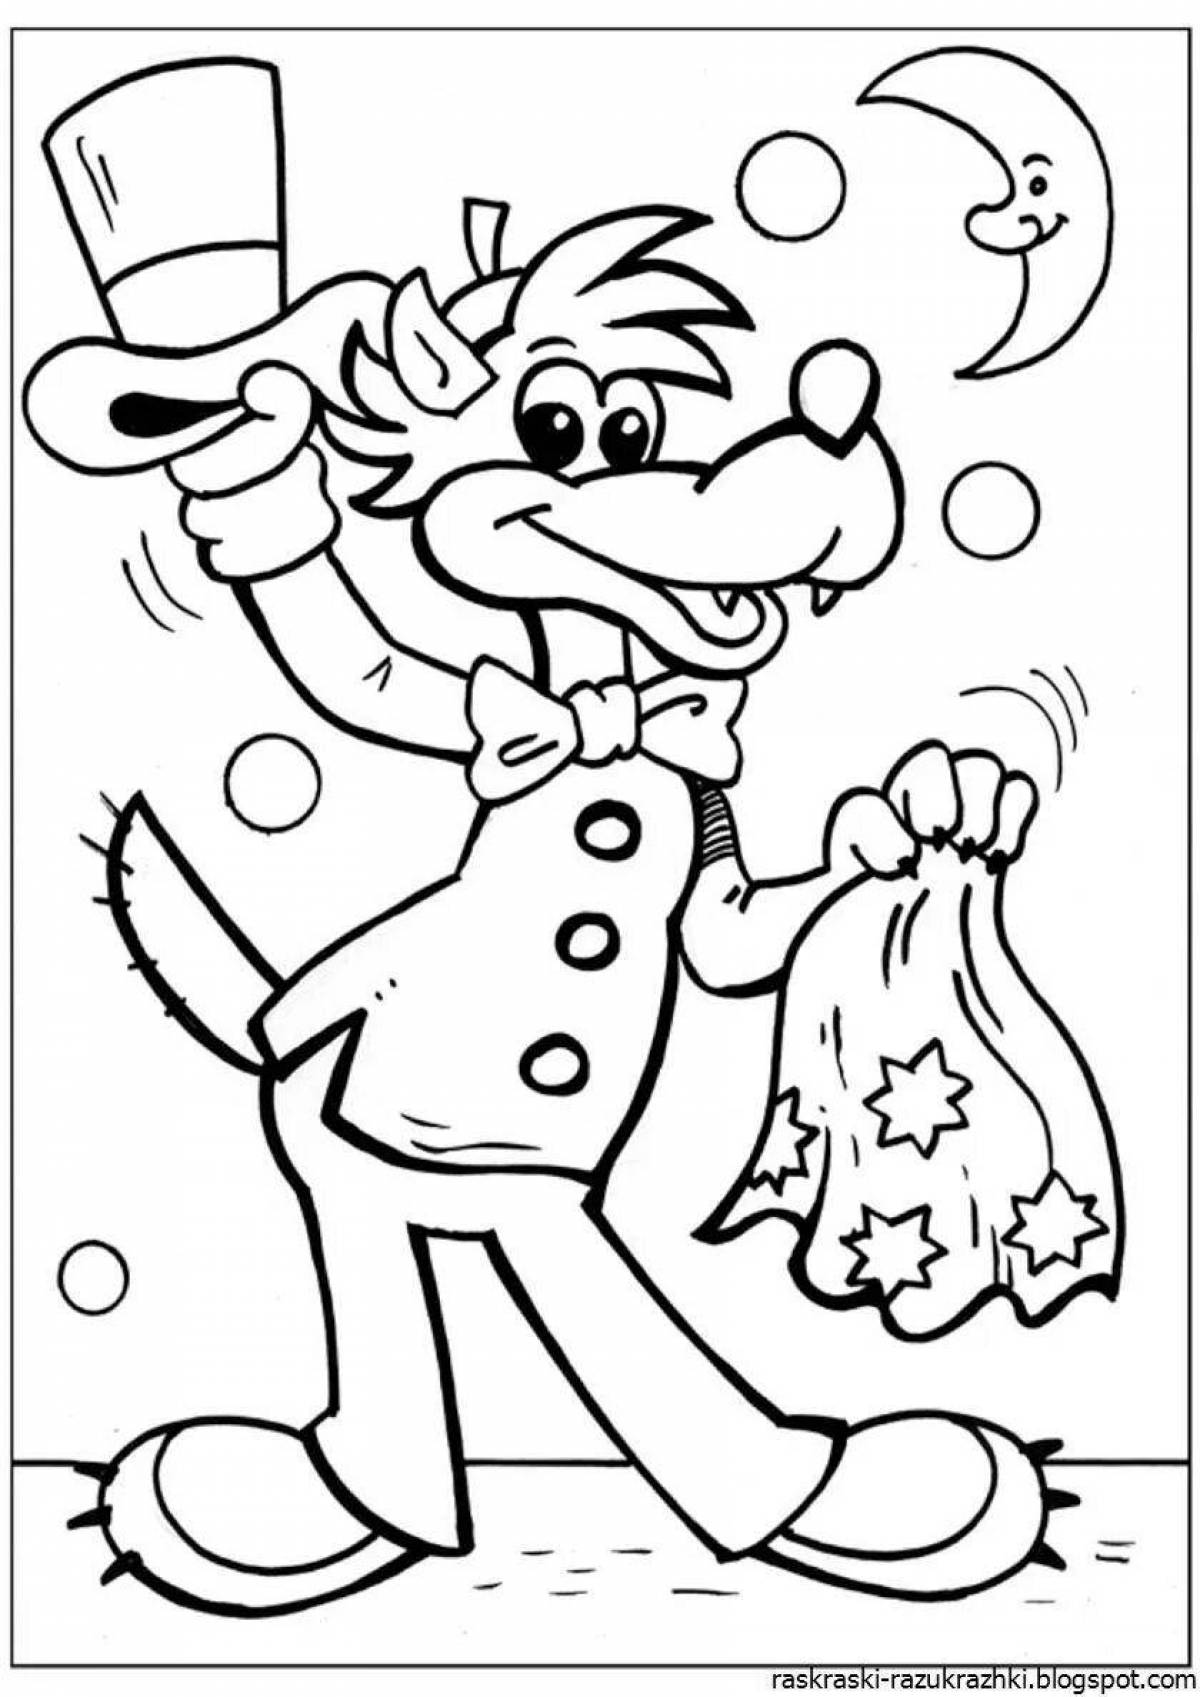 Coloring page for girls oh wait